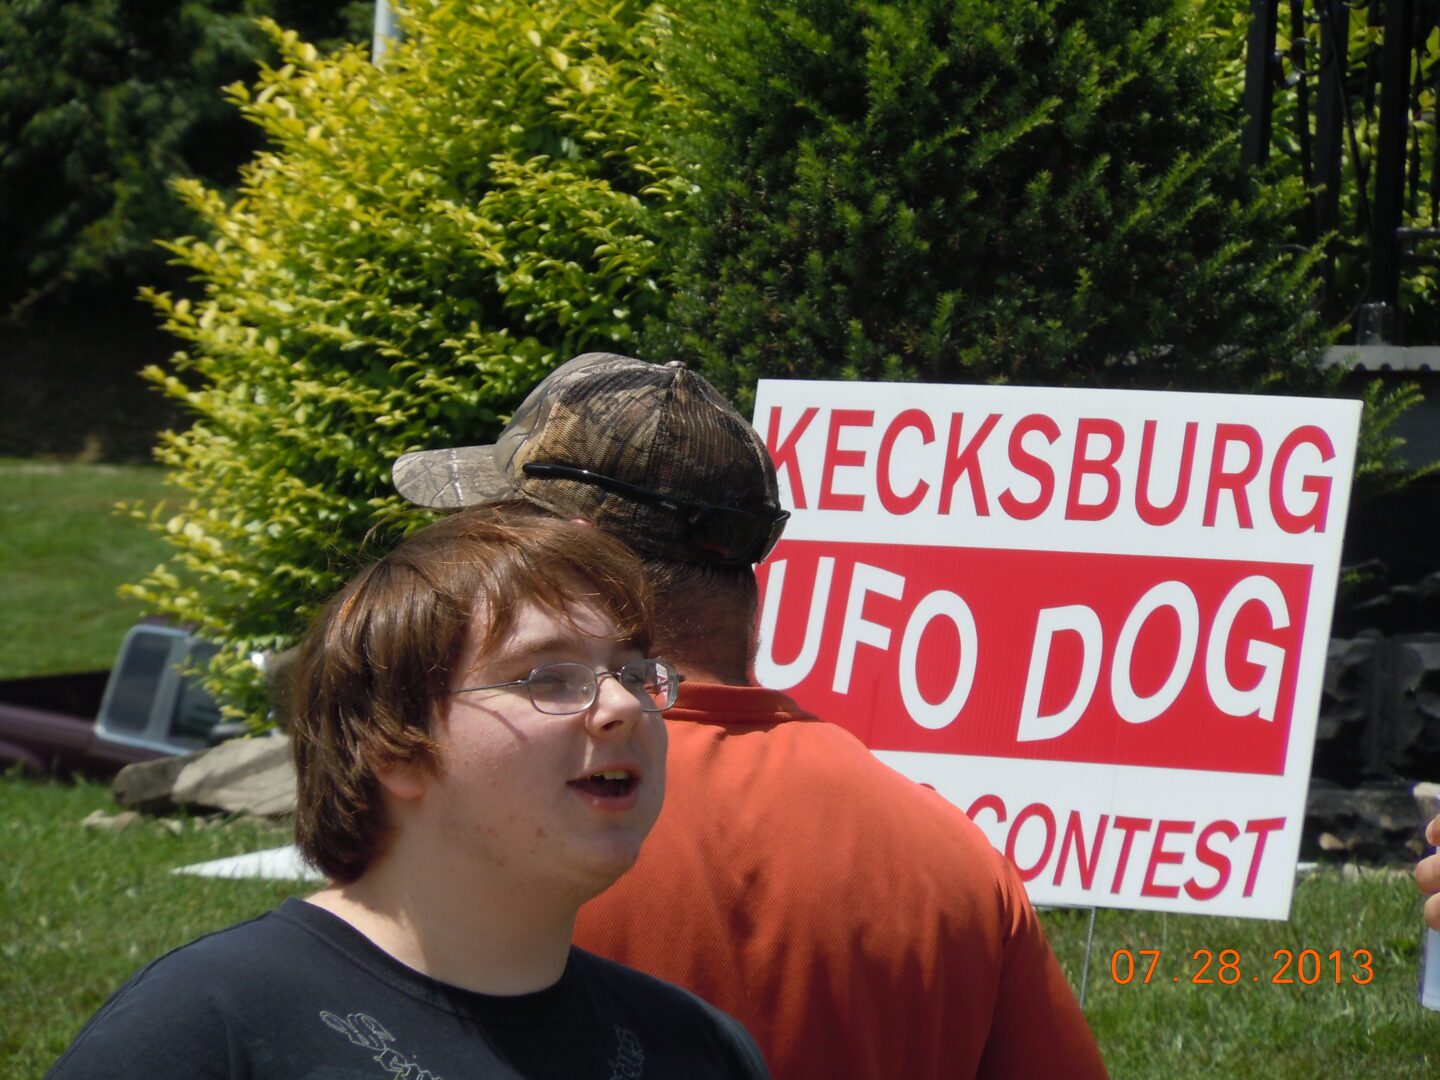 Two people standing next to a sign that says " kecksburg ufo dog contest ".